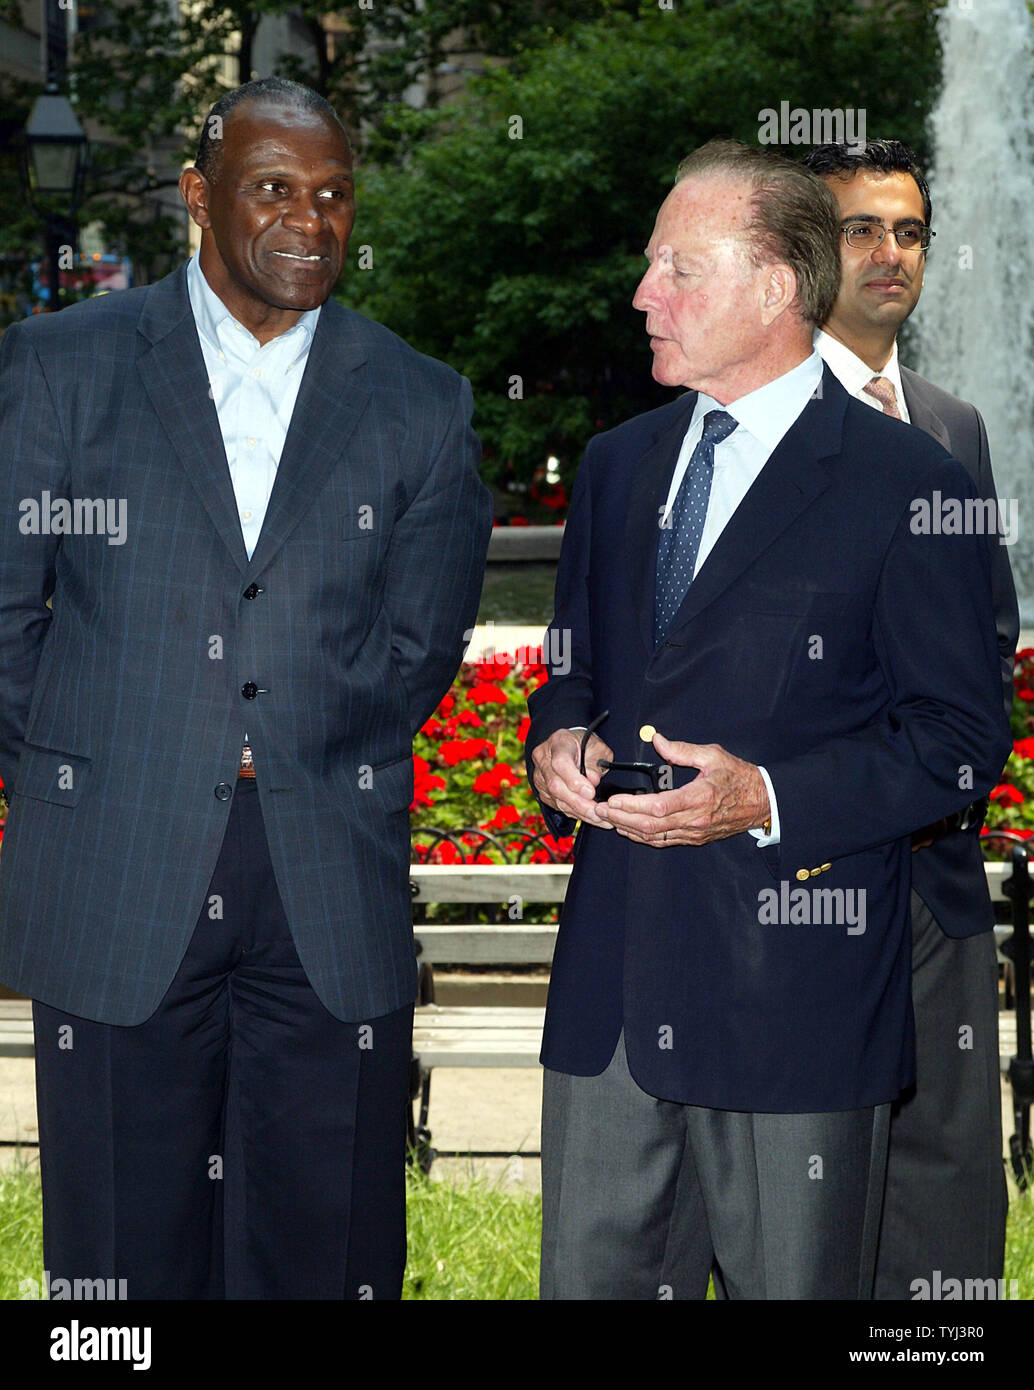 Harry Carson (L) poses with Frank Gifford at the press conference announcing the Partnership between the Pro Football Hall of Fame and the National Sports Museum at Bowling Green Park in New York on June 19, 2007.  (UPI Photo/Laura Cavanaugh) Stock Photo